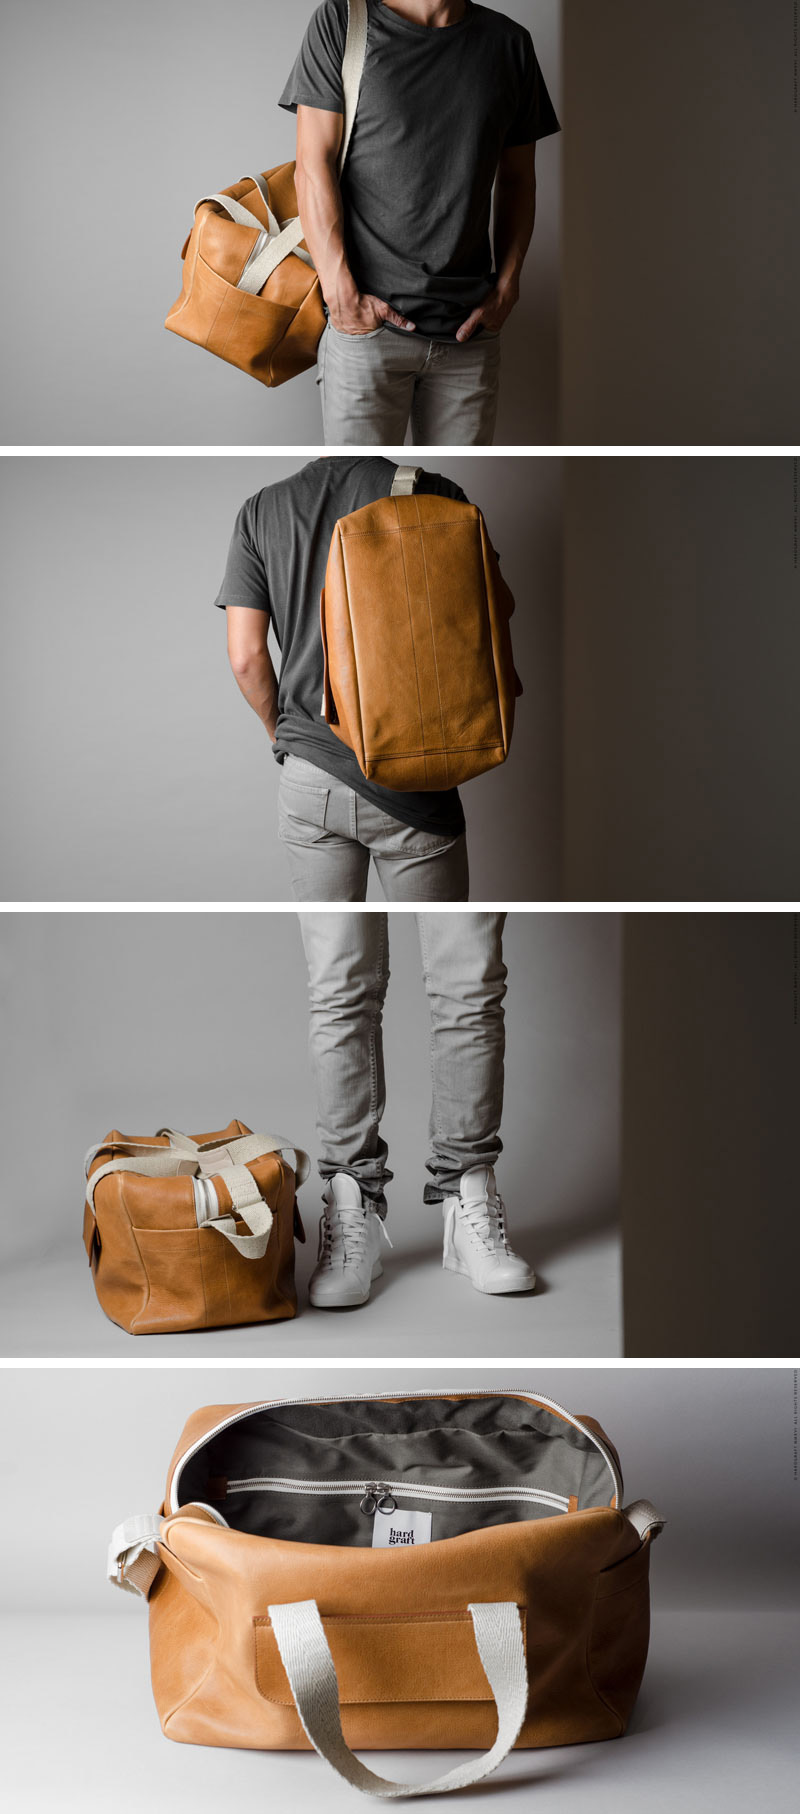 This modern, light tan leather duffel bag, adds a bit of color to your travels while still keeping things neutral and practical.